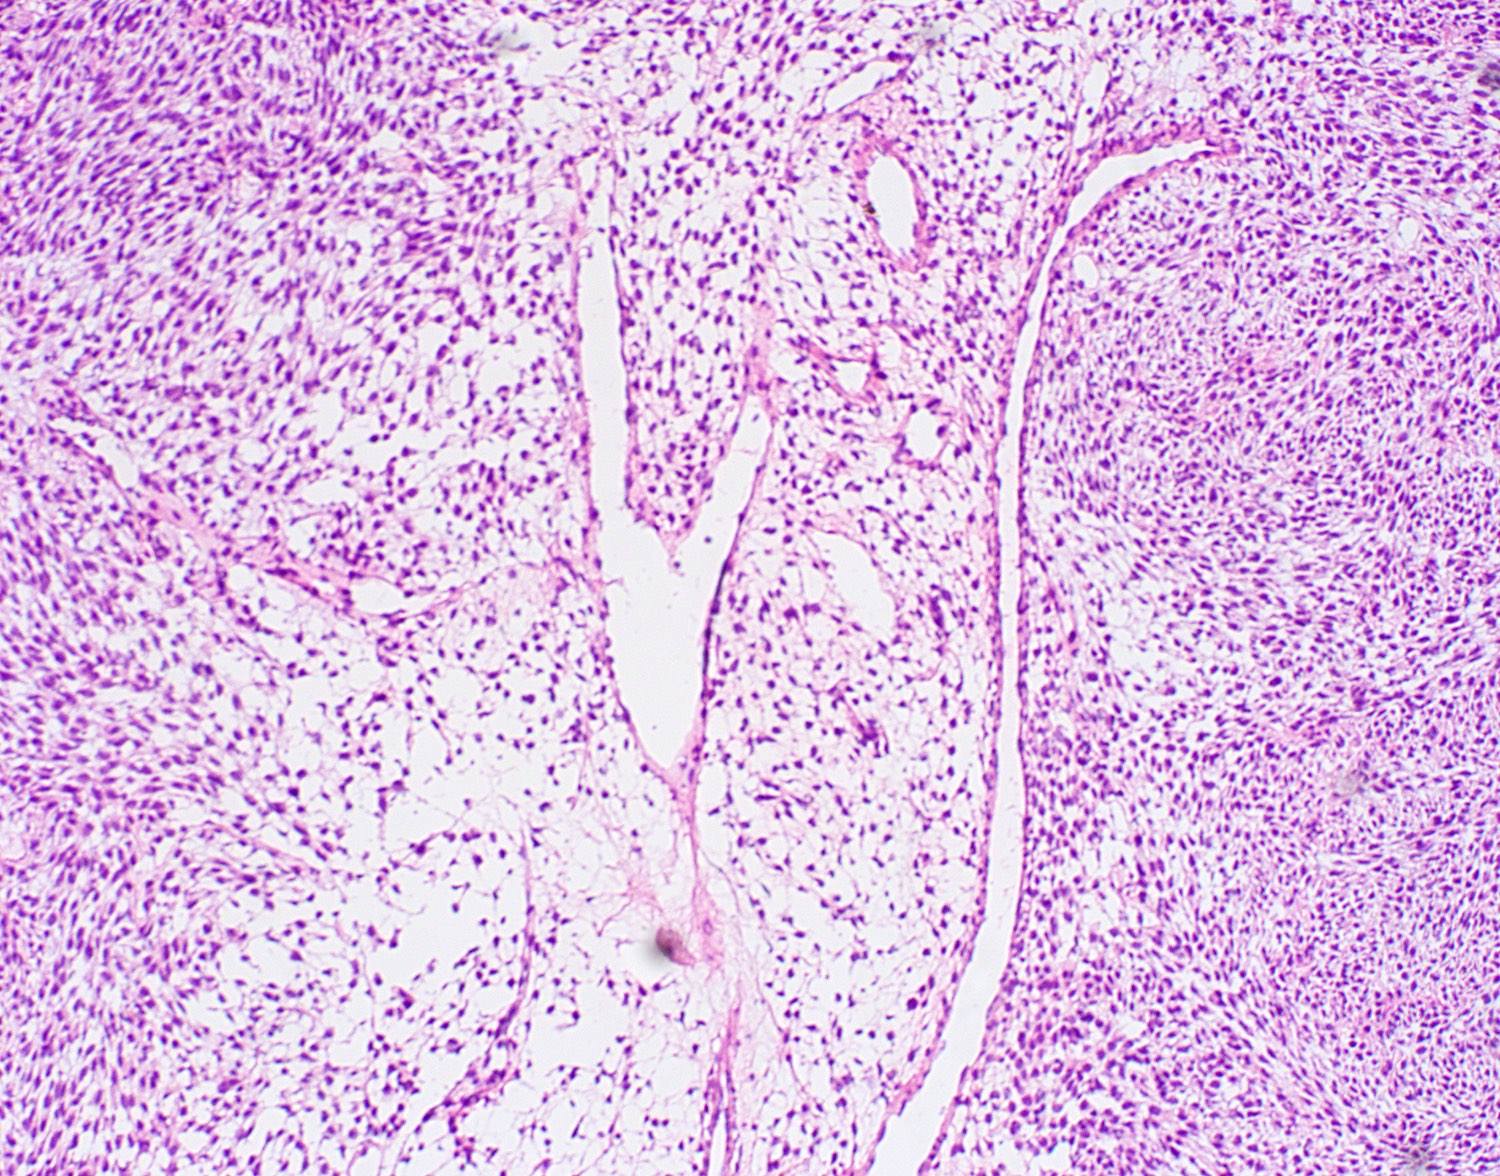 Perivascular proliferation and staghorn vessels